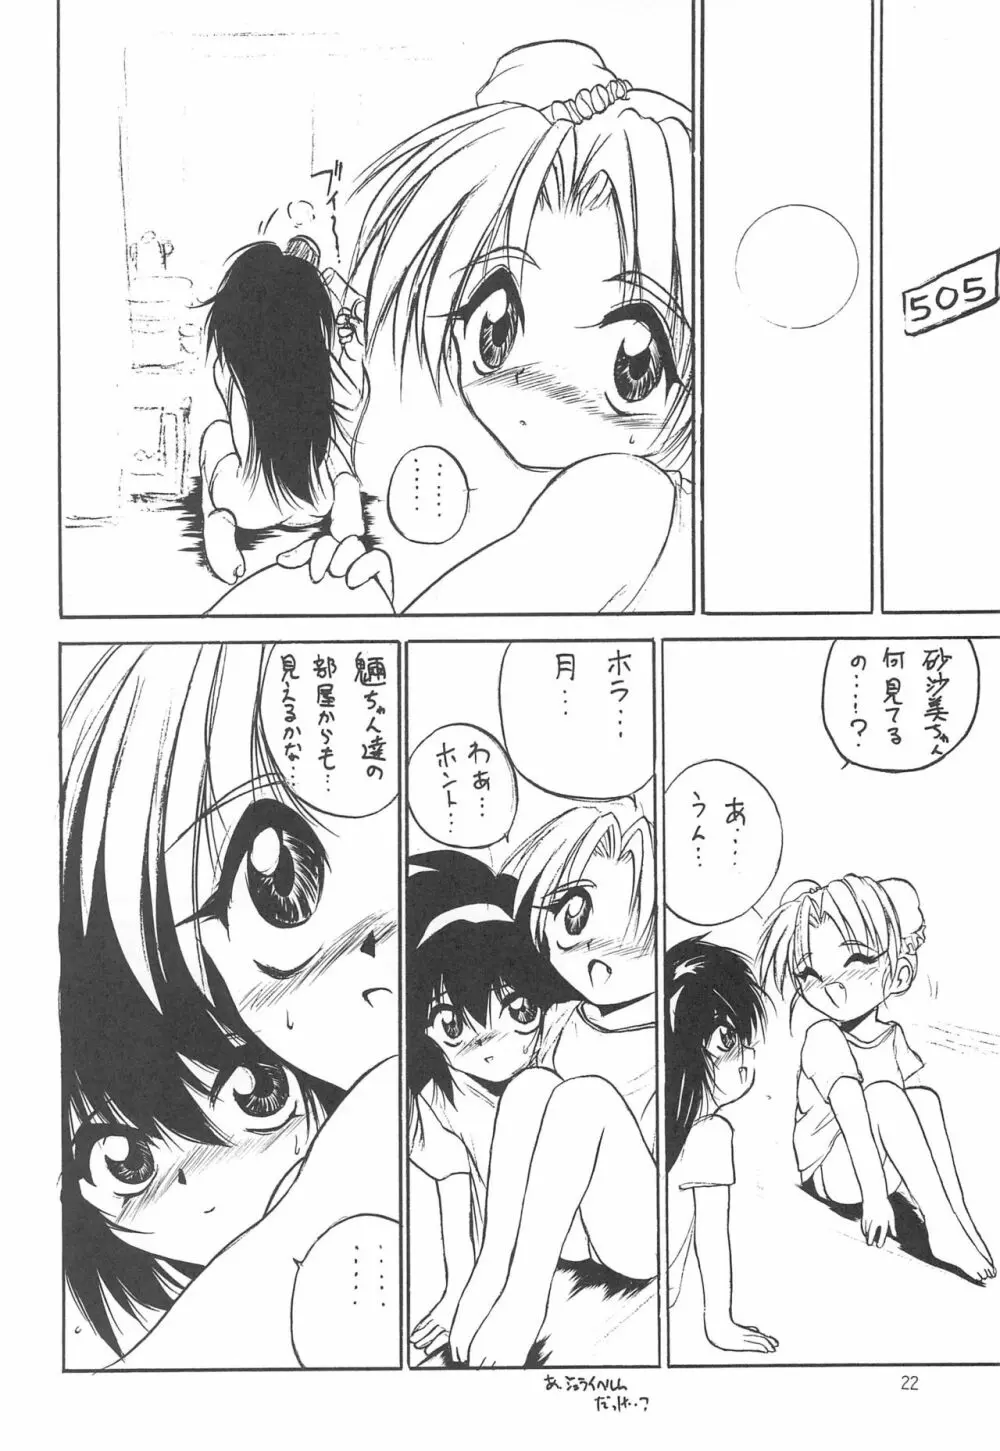 With Page.22